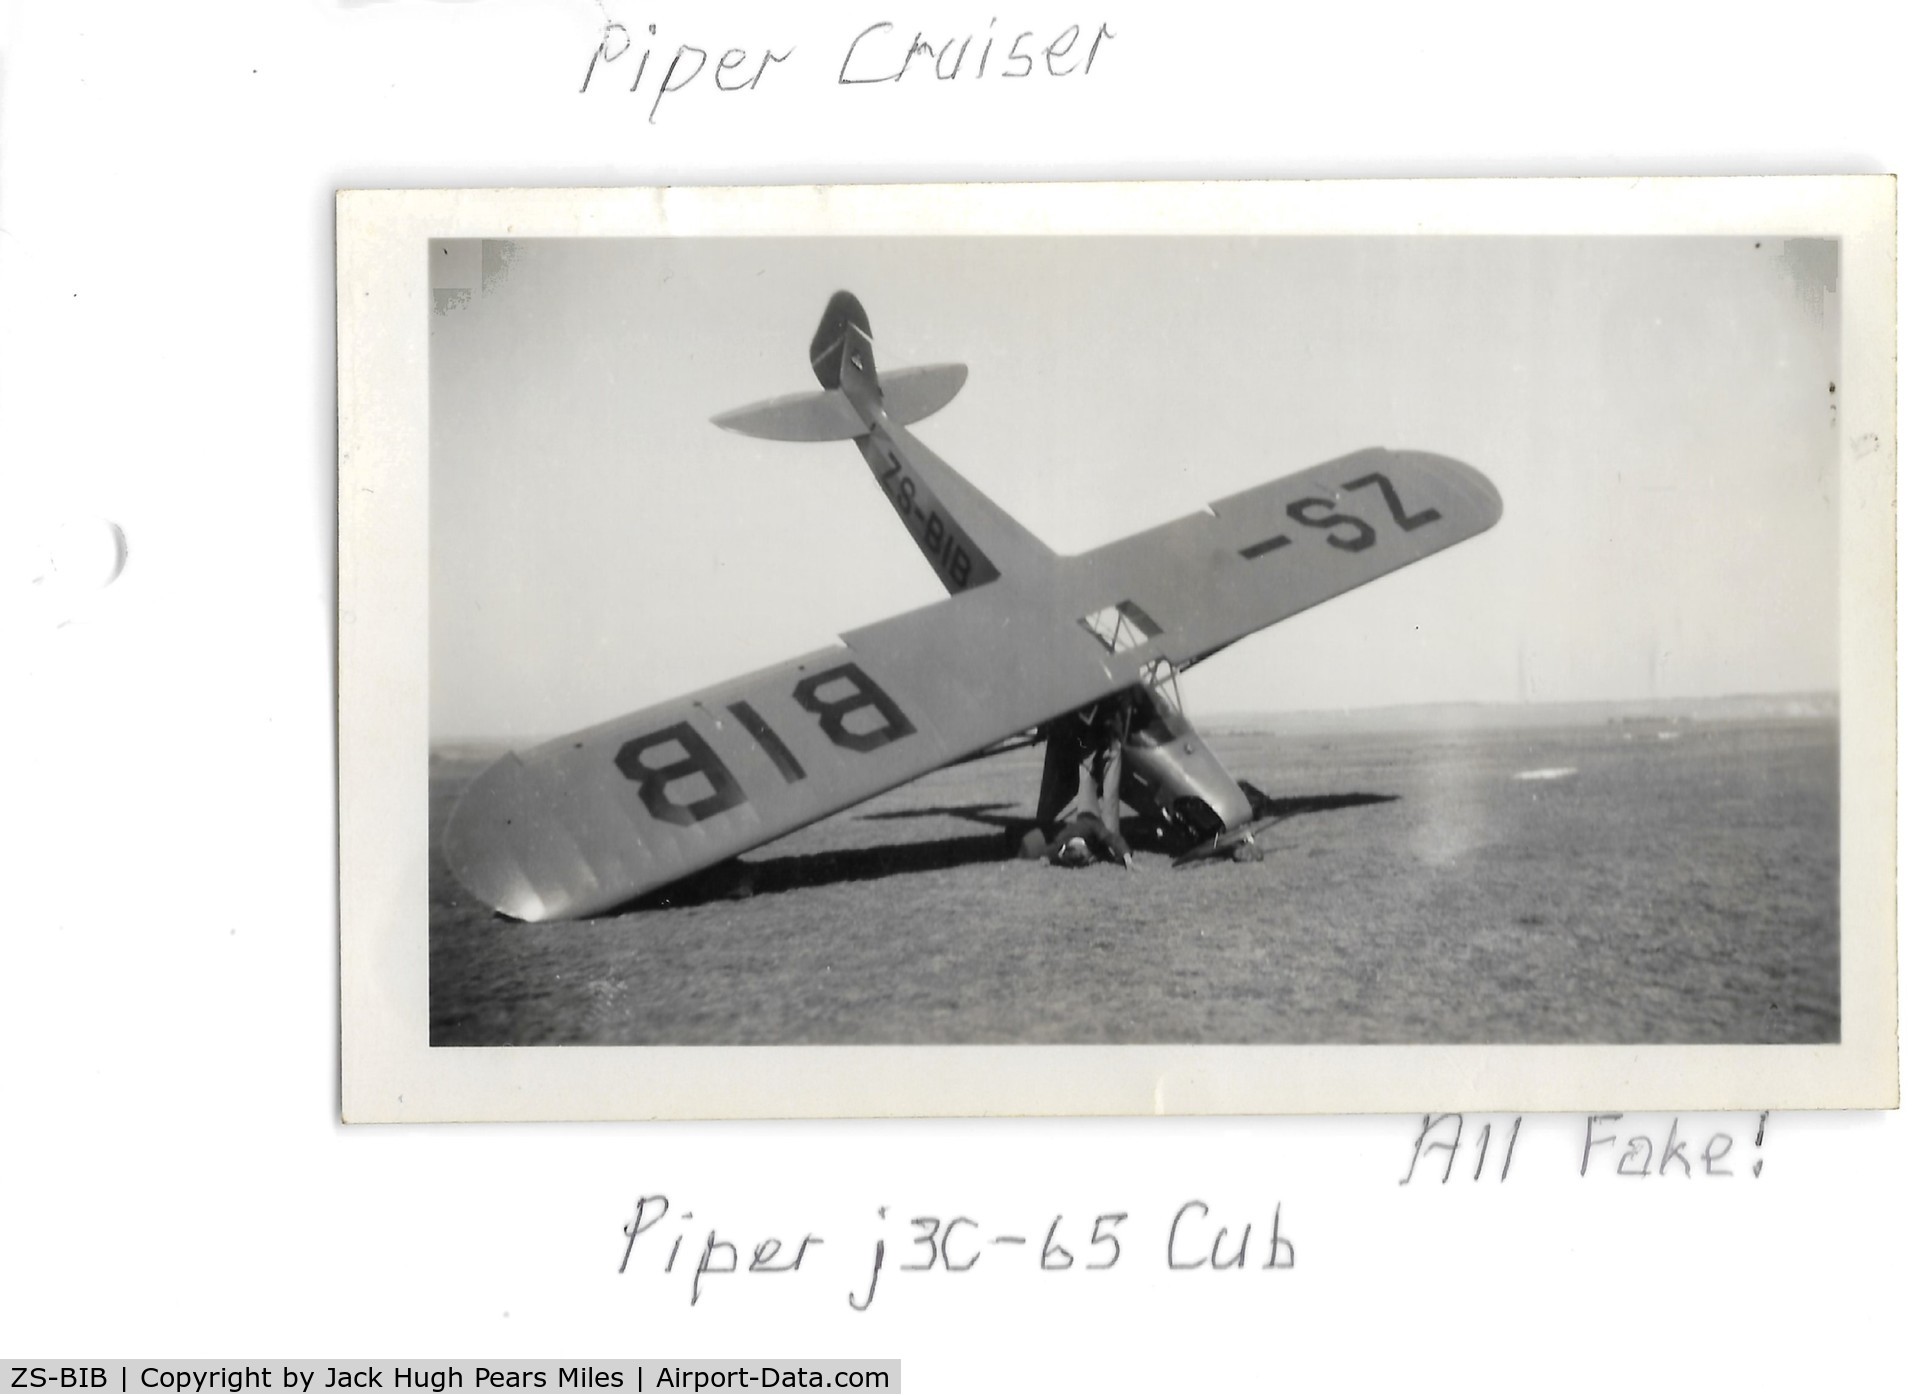 ZS-BIB, 1945 Piper J3C-65 Cub Cub C/N 20119, Faked Accident. Photo from my late father's photo album.
I think the photo was taken in Kroonstad in South Africa.